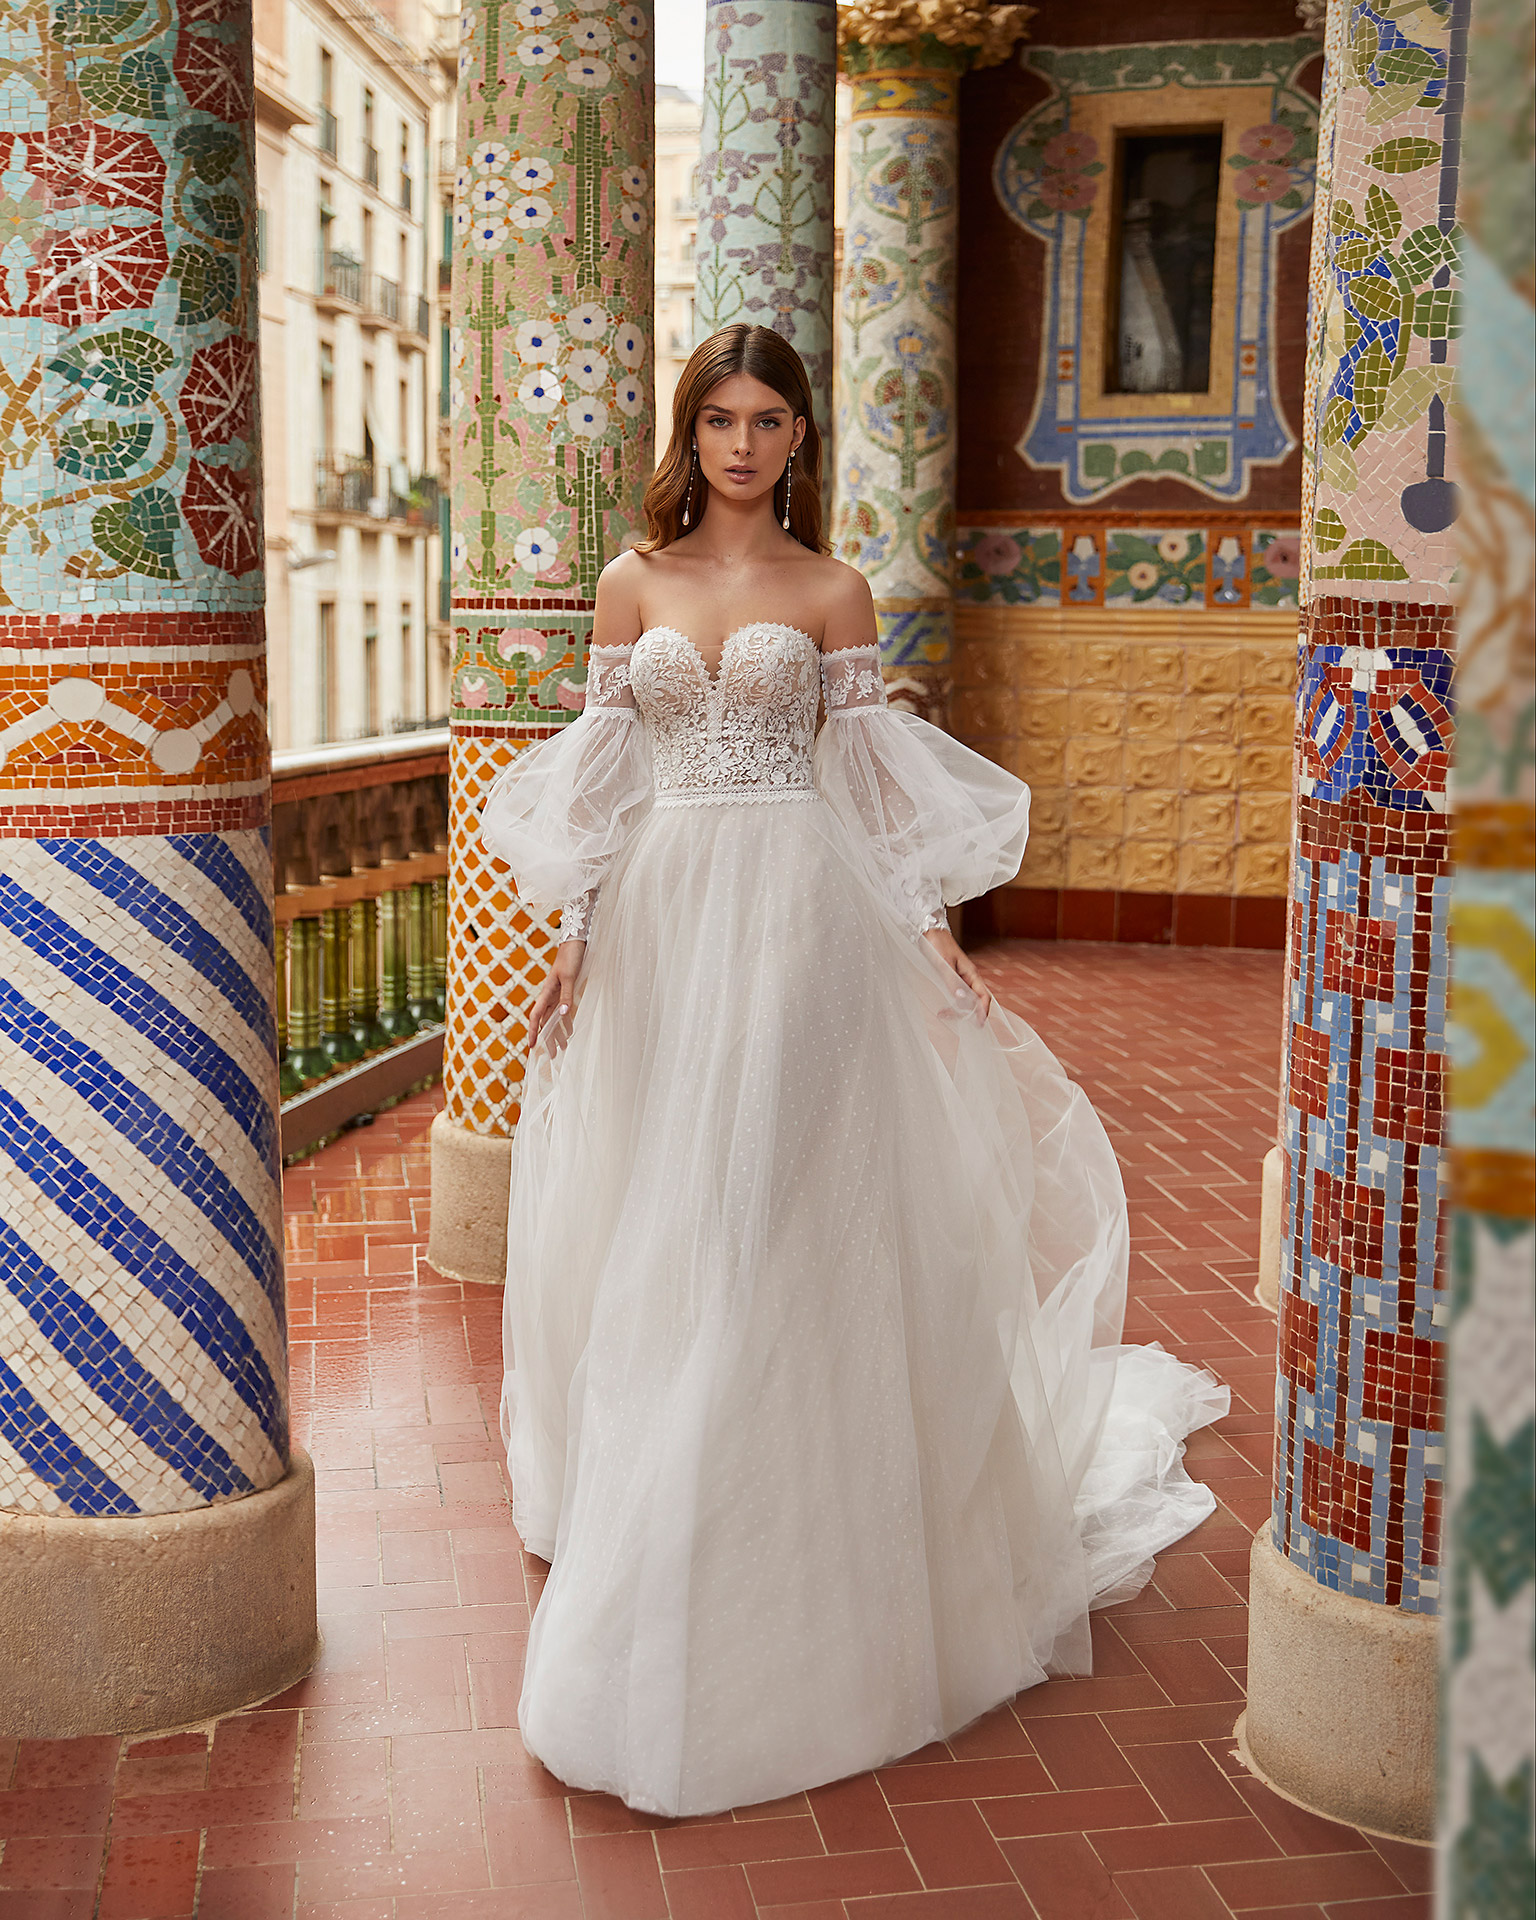 Romantic princess-style wedding dress, made of dot tulle and lace appliqués; with a push-up corset structure, a button-up back, and long dot tulle and lace sleeves. Exclusive Luna Novias outfit made of dot tulle and lace with beadwork. LUNA_NOVIAS.